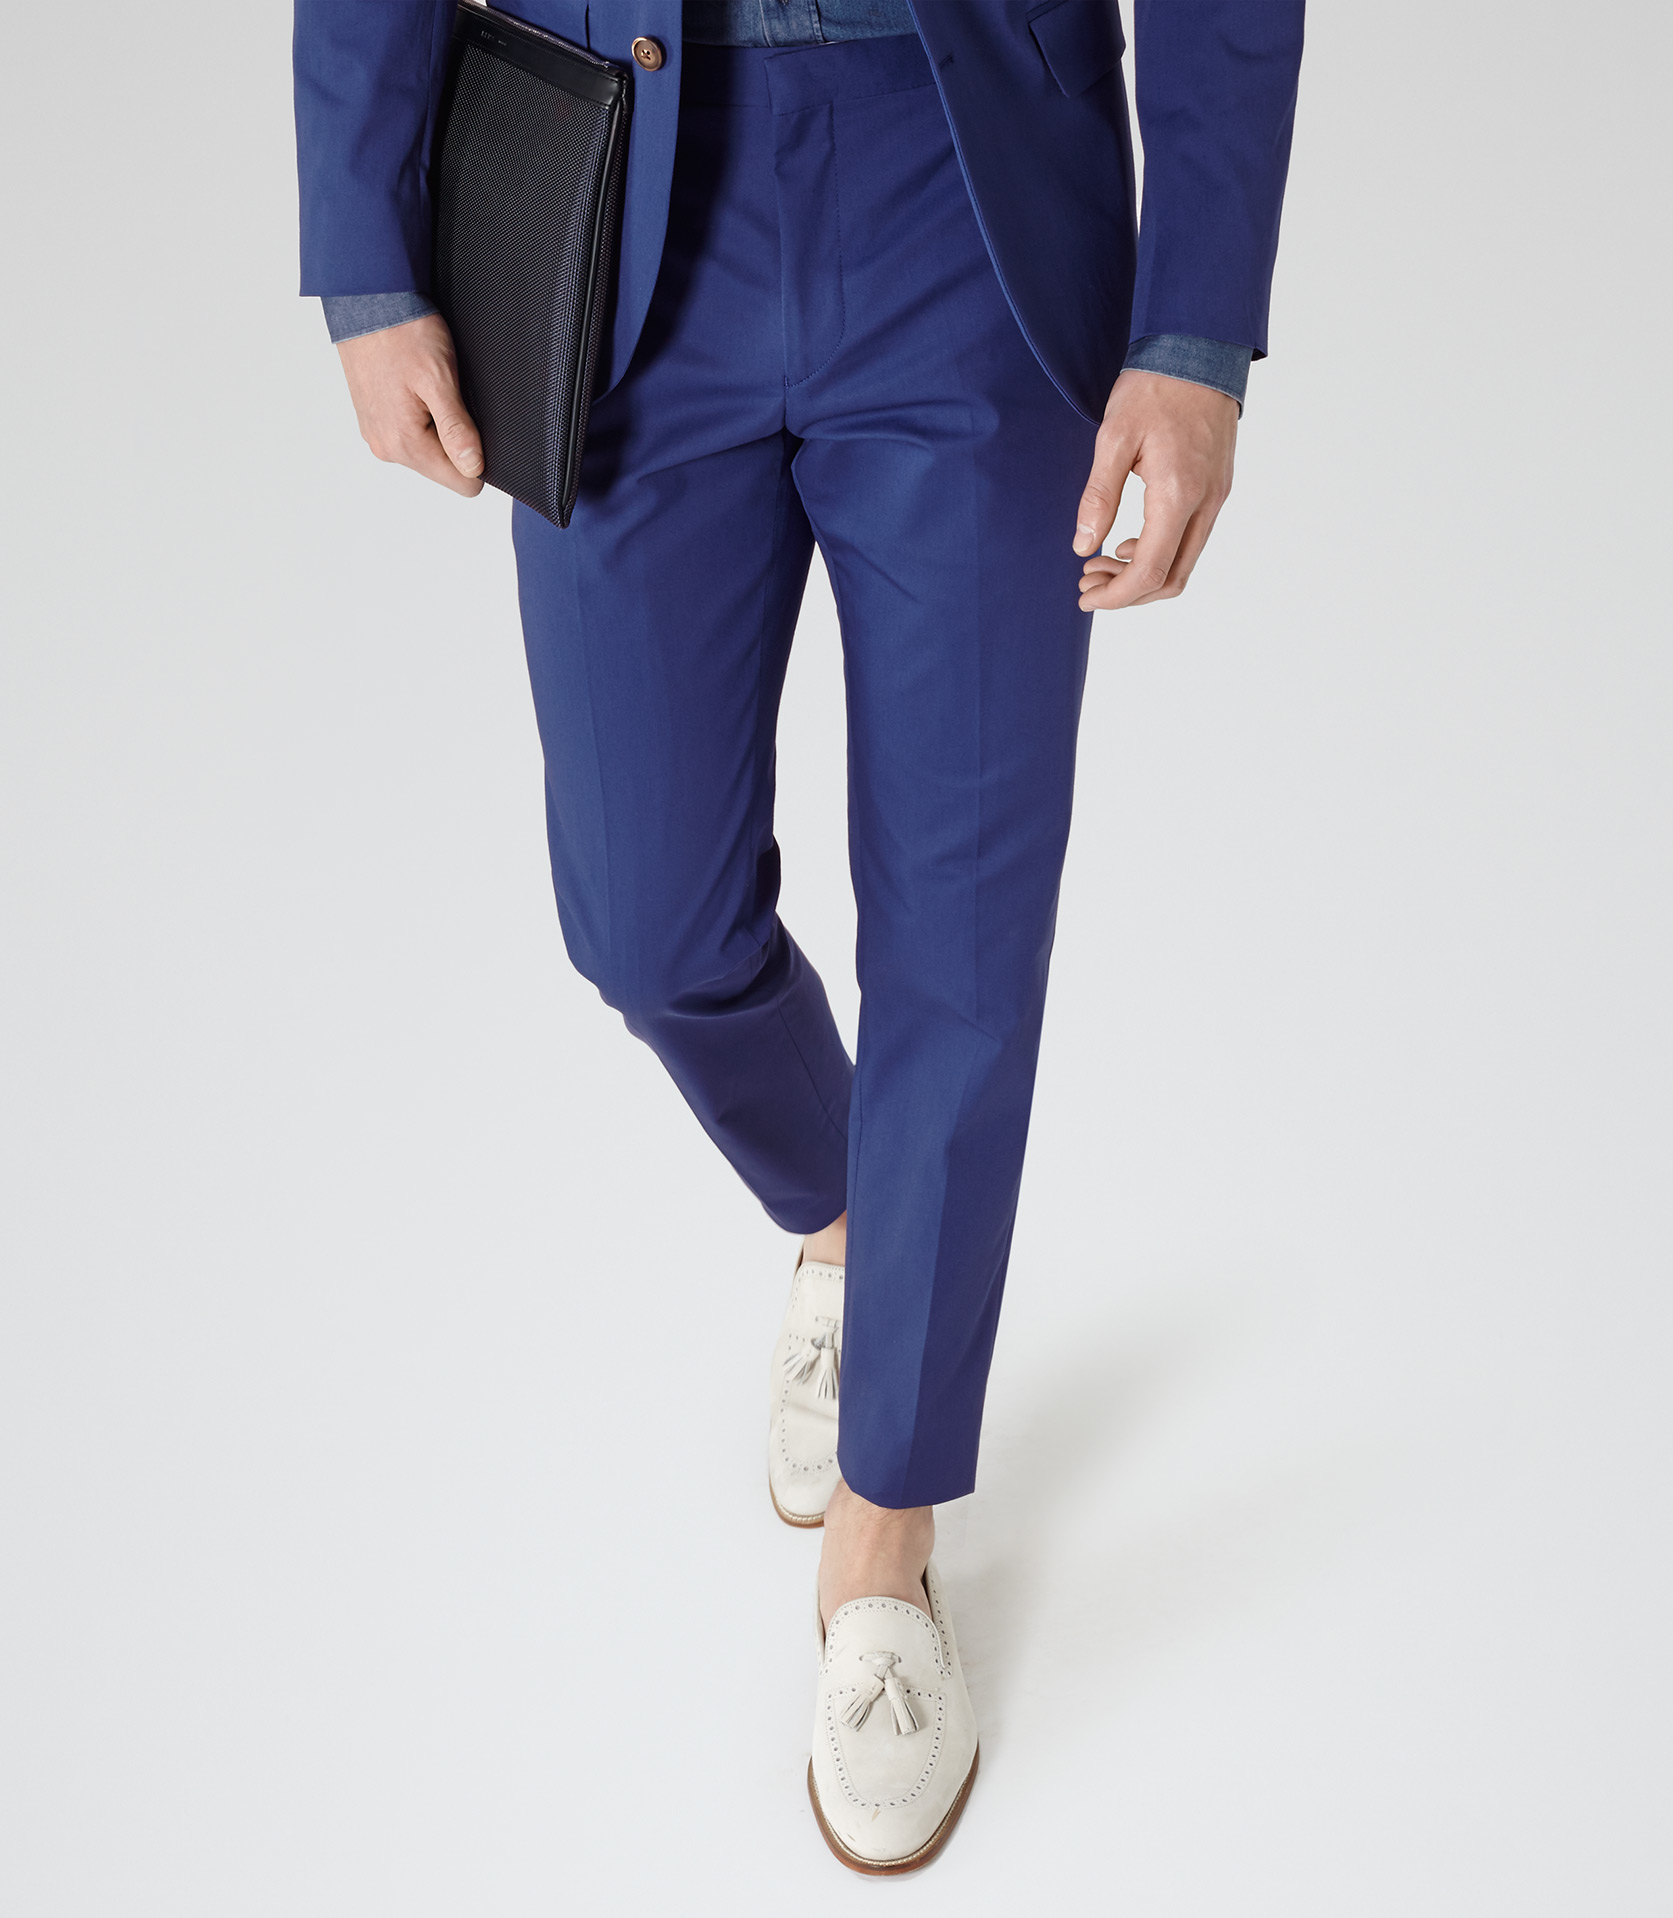 Reiss Shannon T Slim-Fit Tailored Trousers in Blue for Men - Lyst